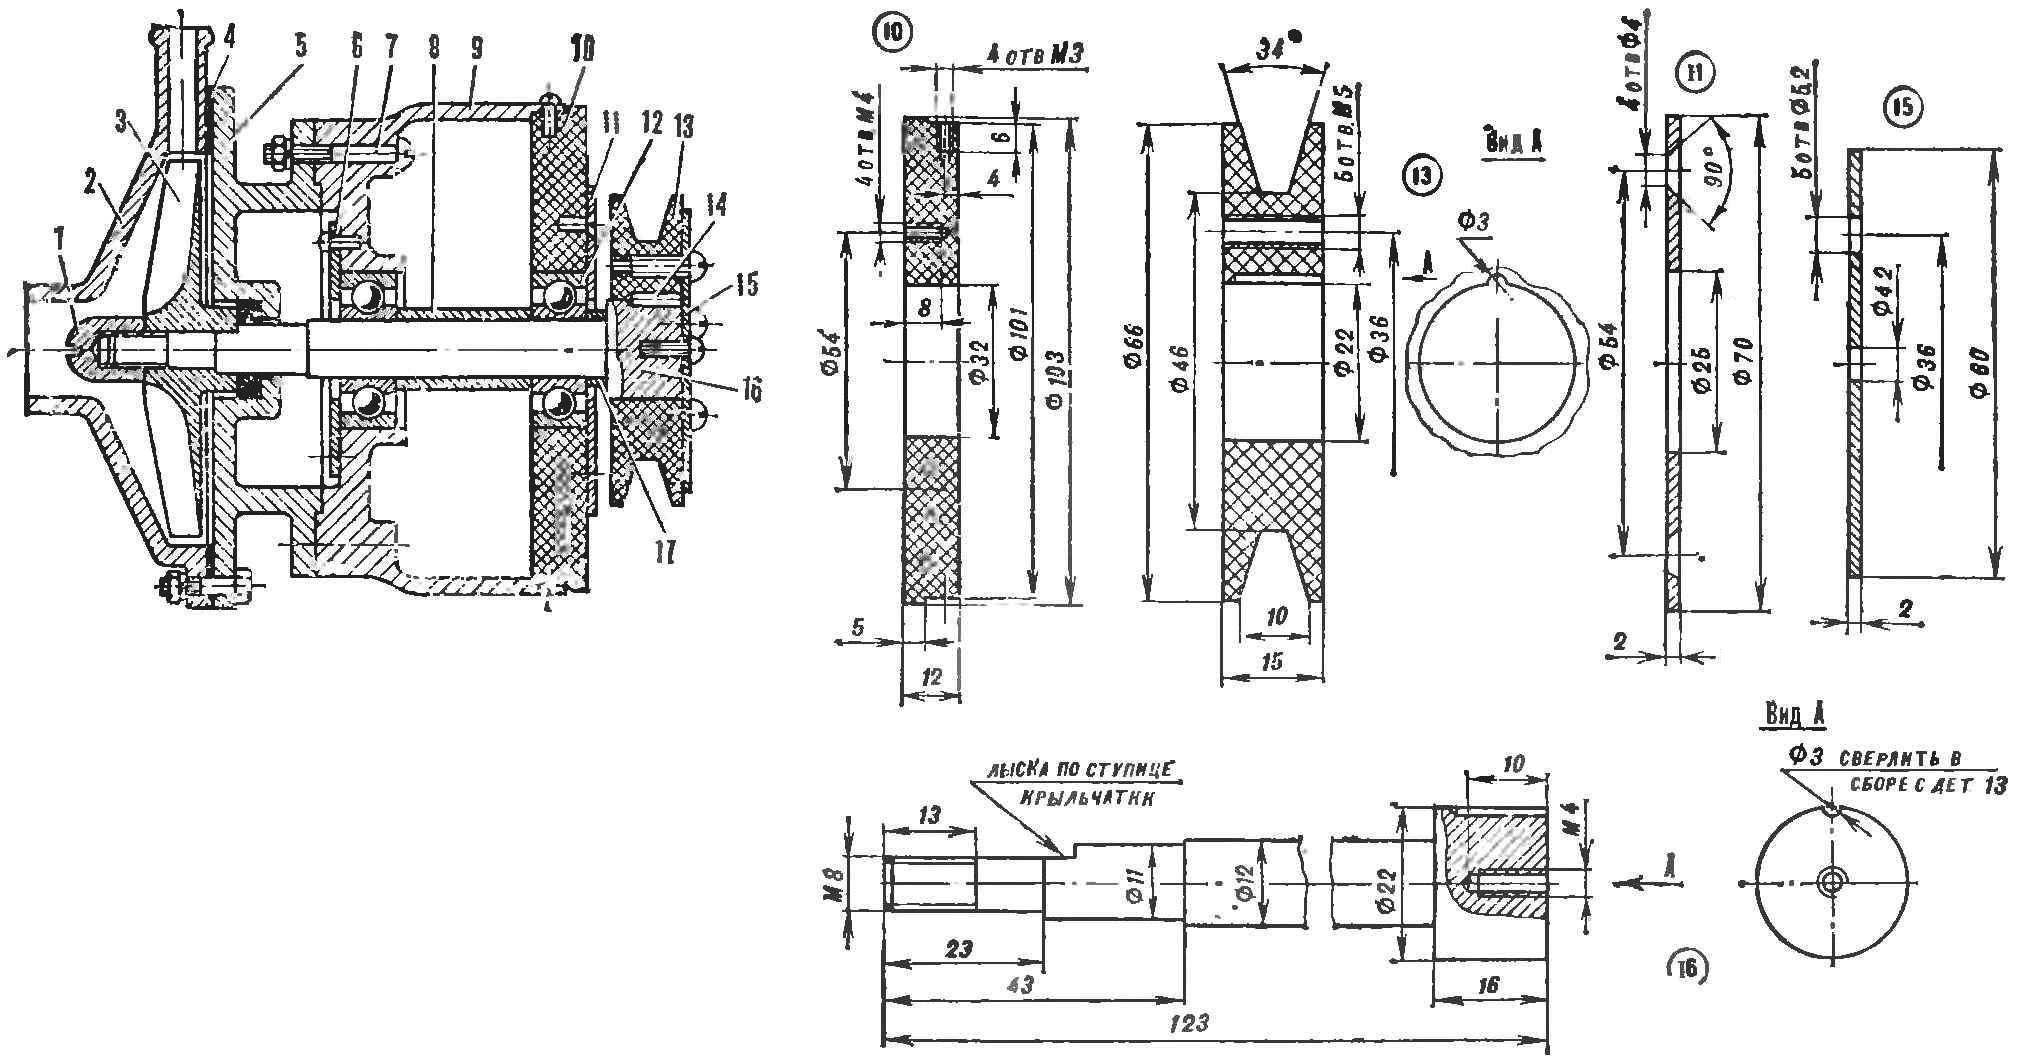 Fig. 3. The pump section